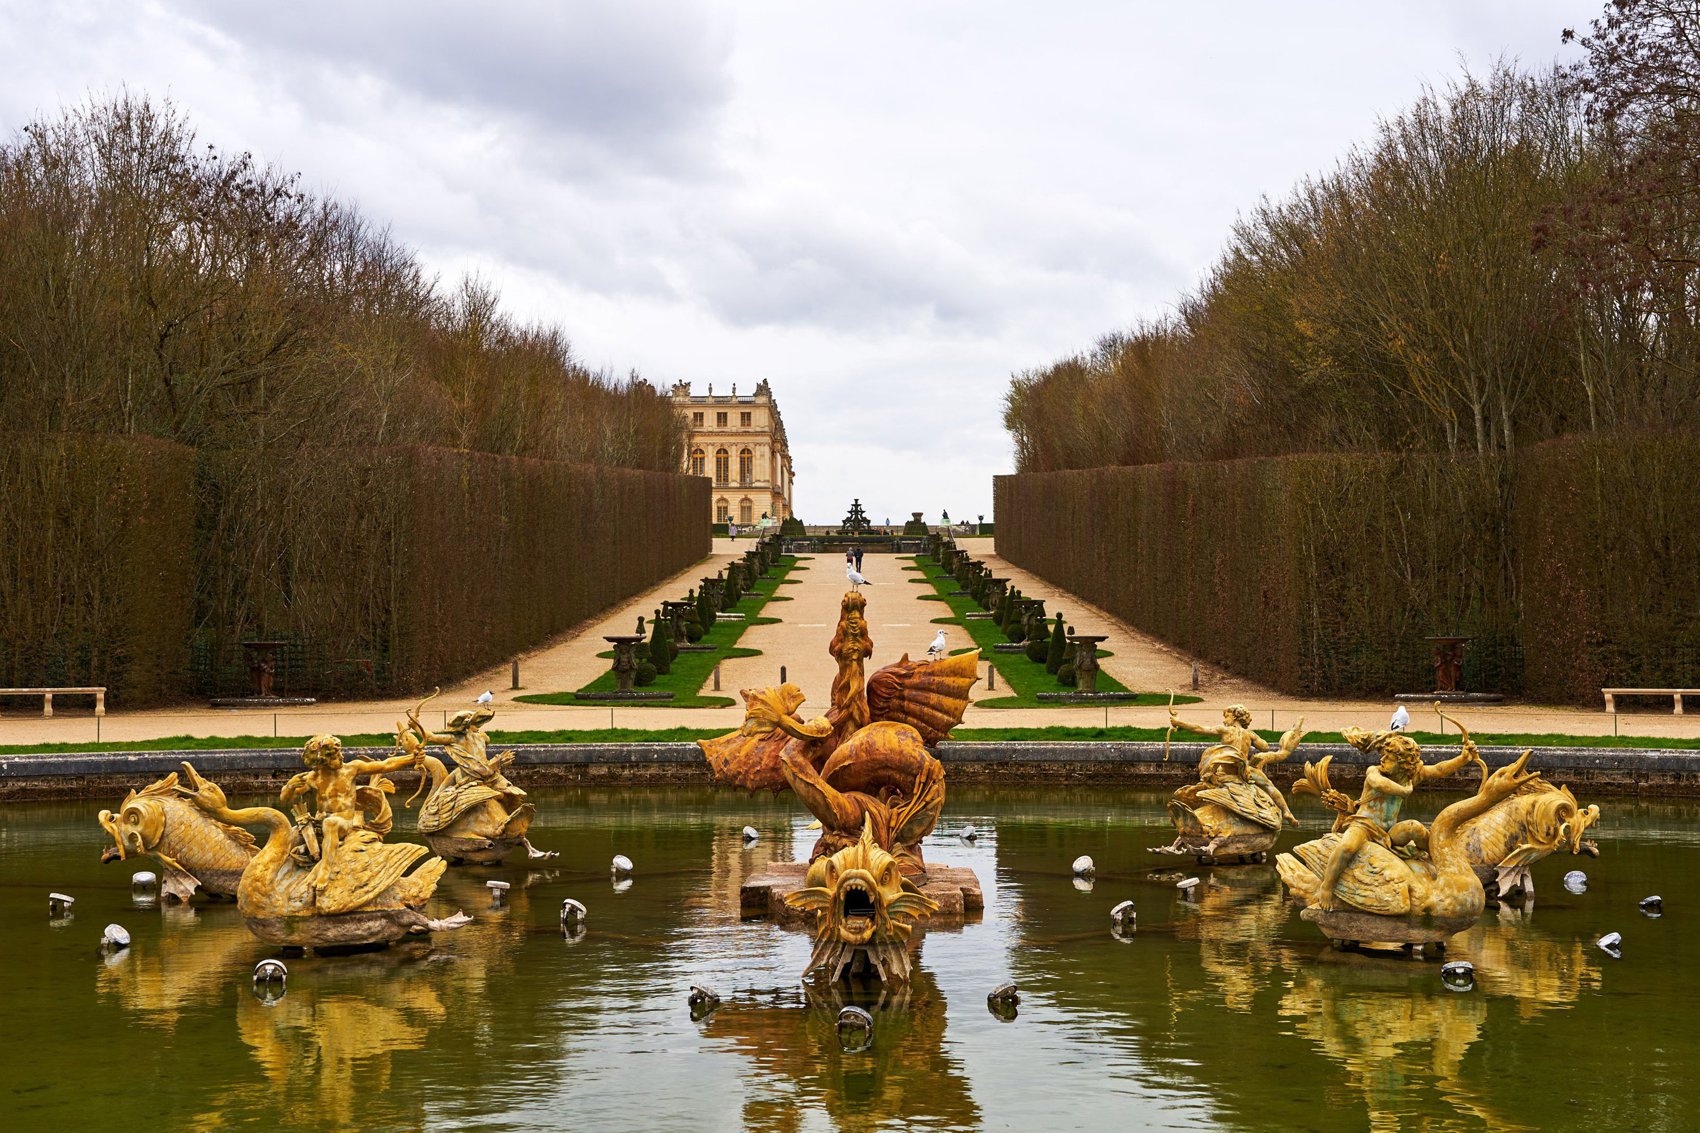 Hero Image for Versailles (Swans, Chateau, Park) Spring 201903